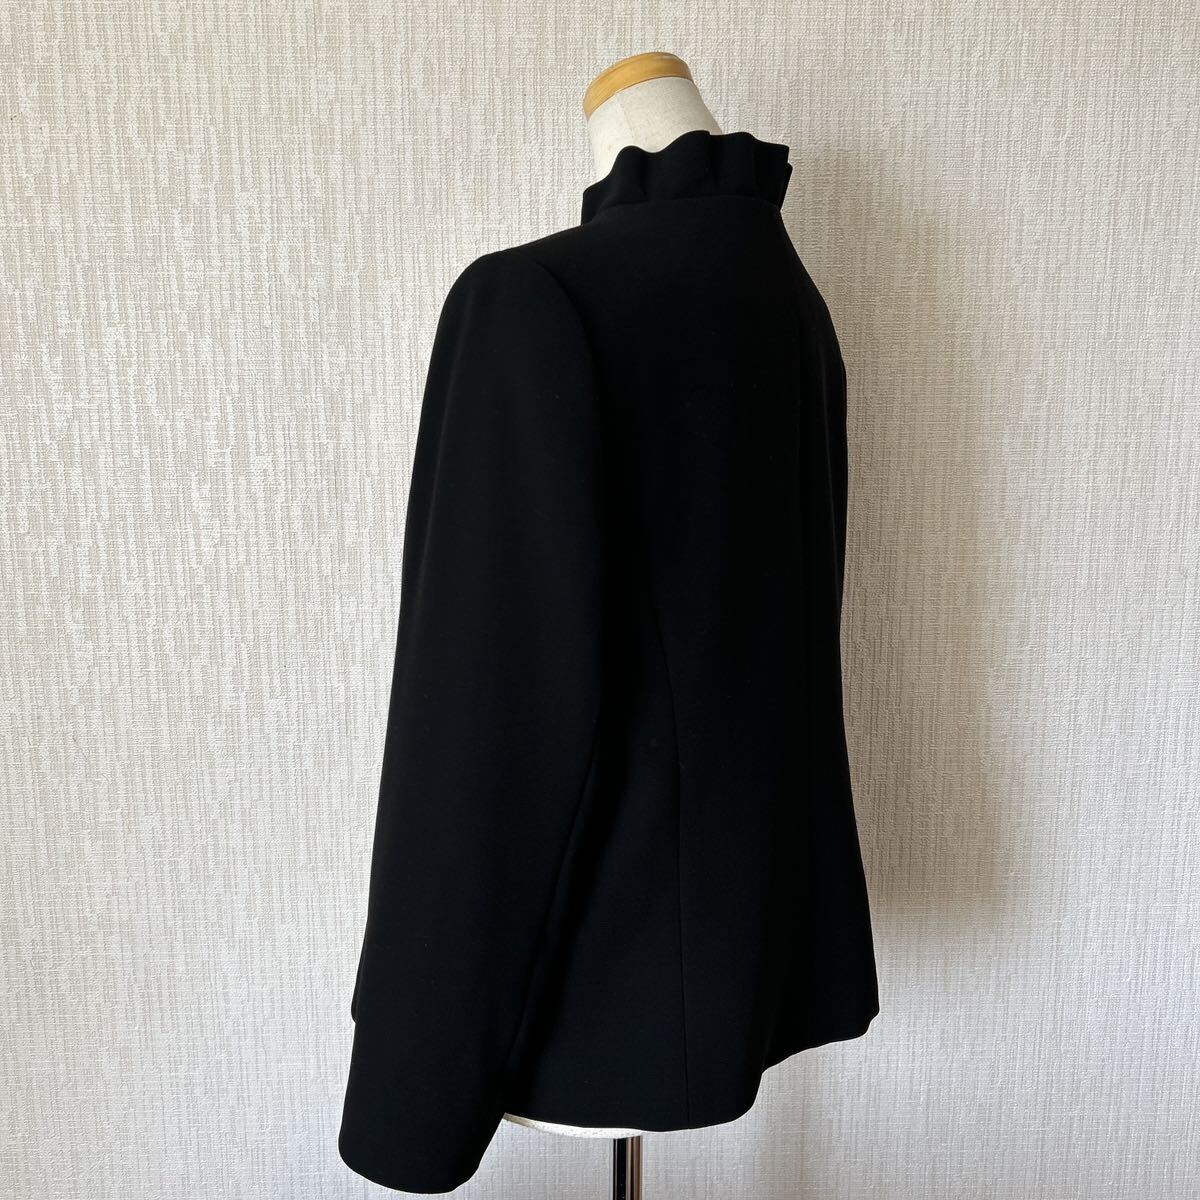 lapi-nLAPINE# mourning dress black formal # large size 15 number # jacket & pants 2 point top and bottom setup pants suit # black ceremonial occasions . clothes 